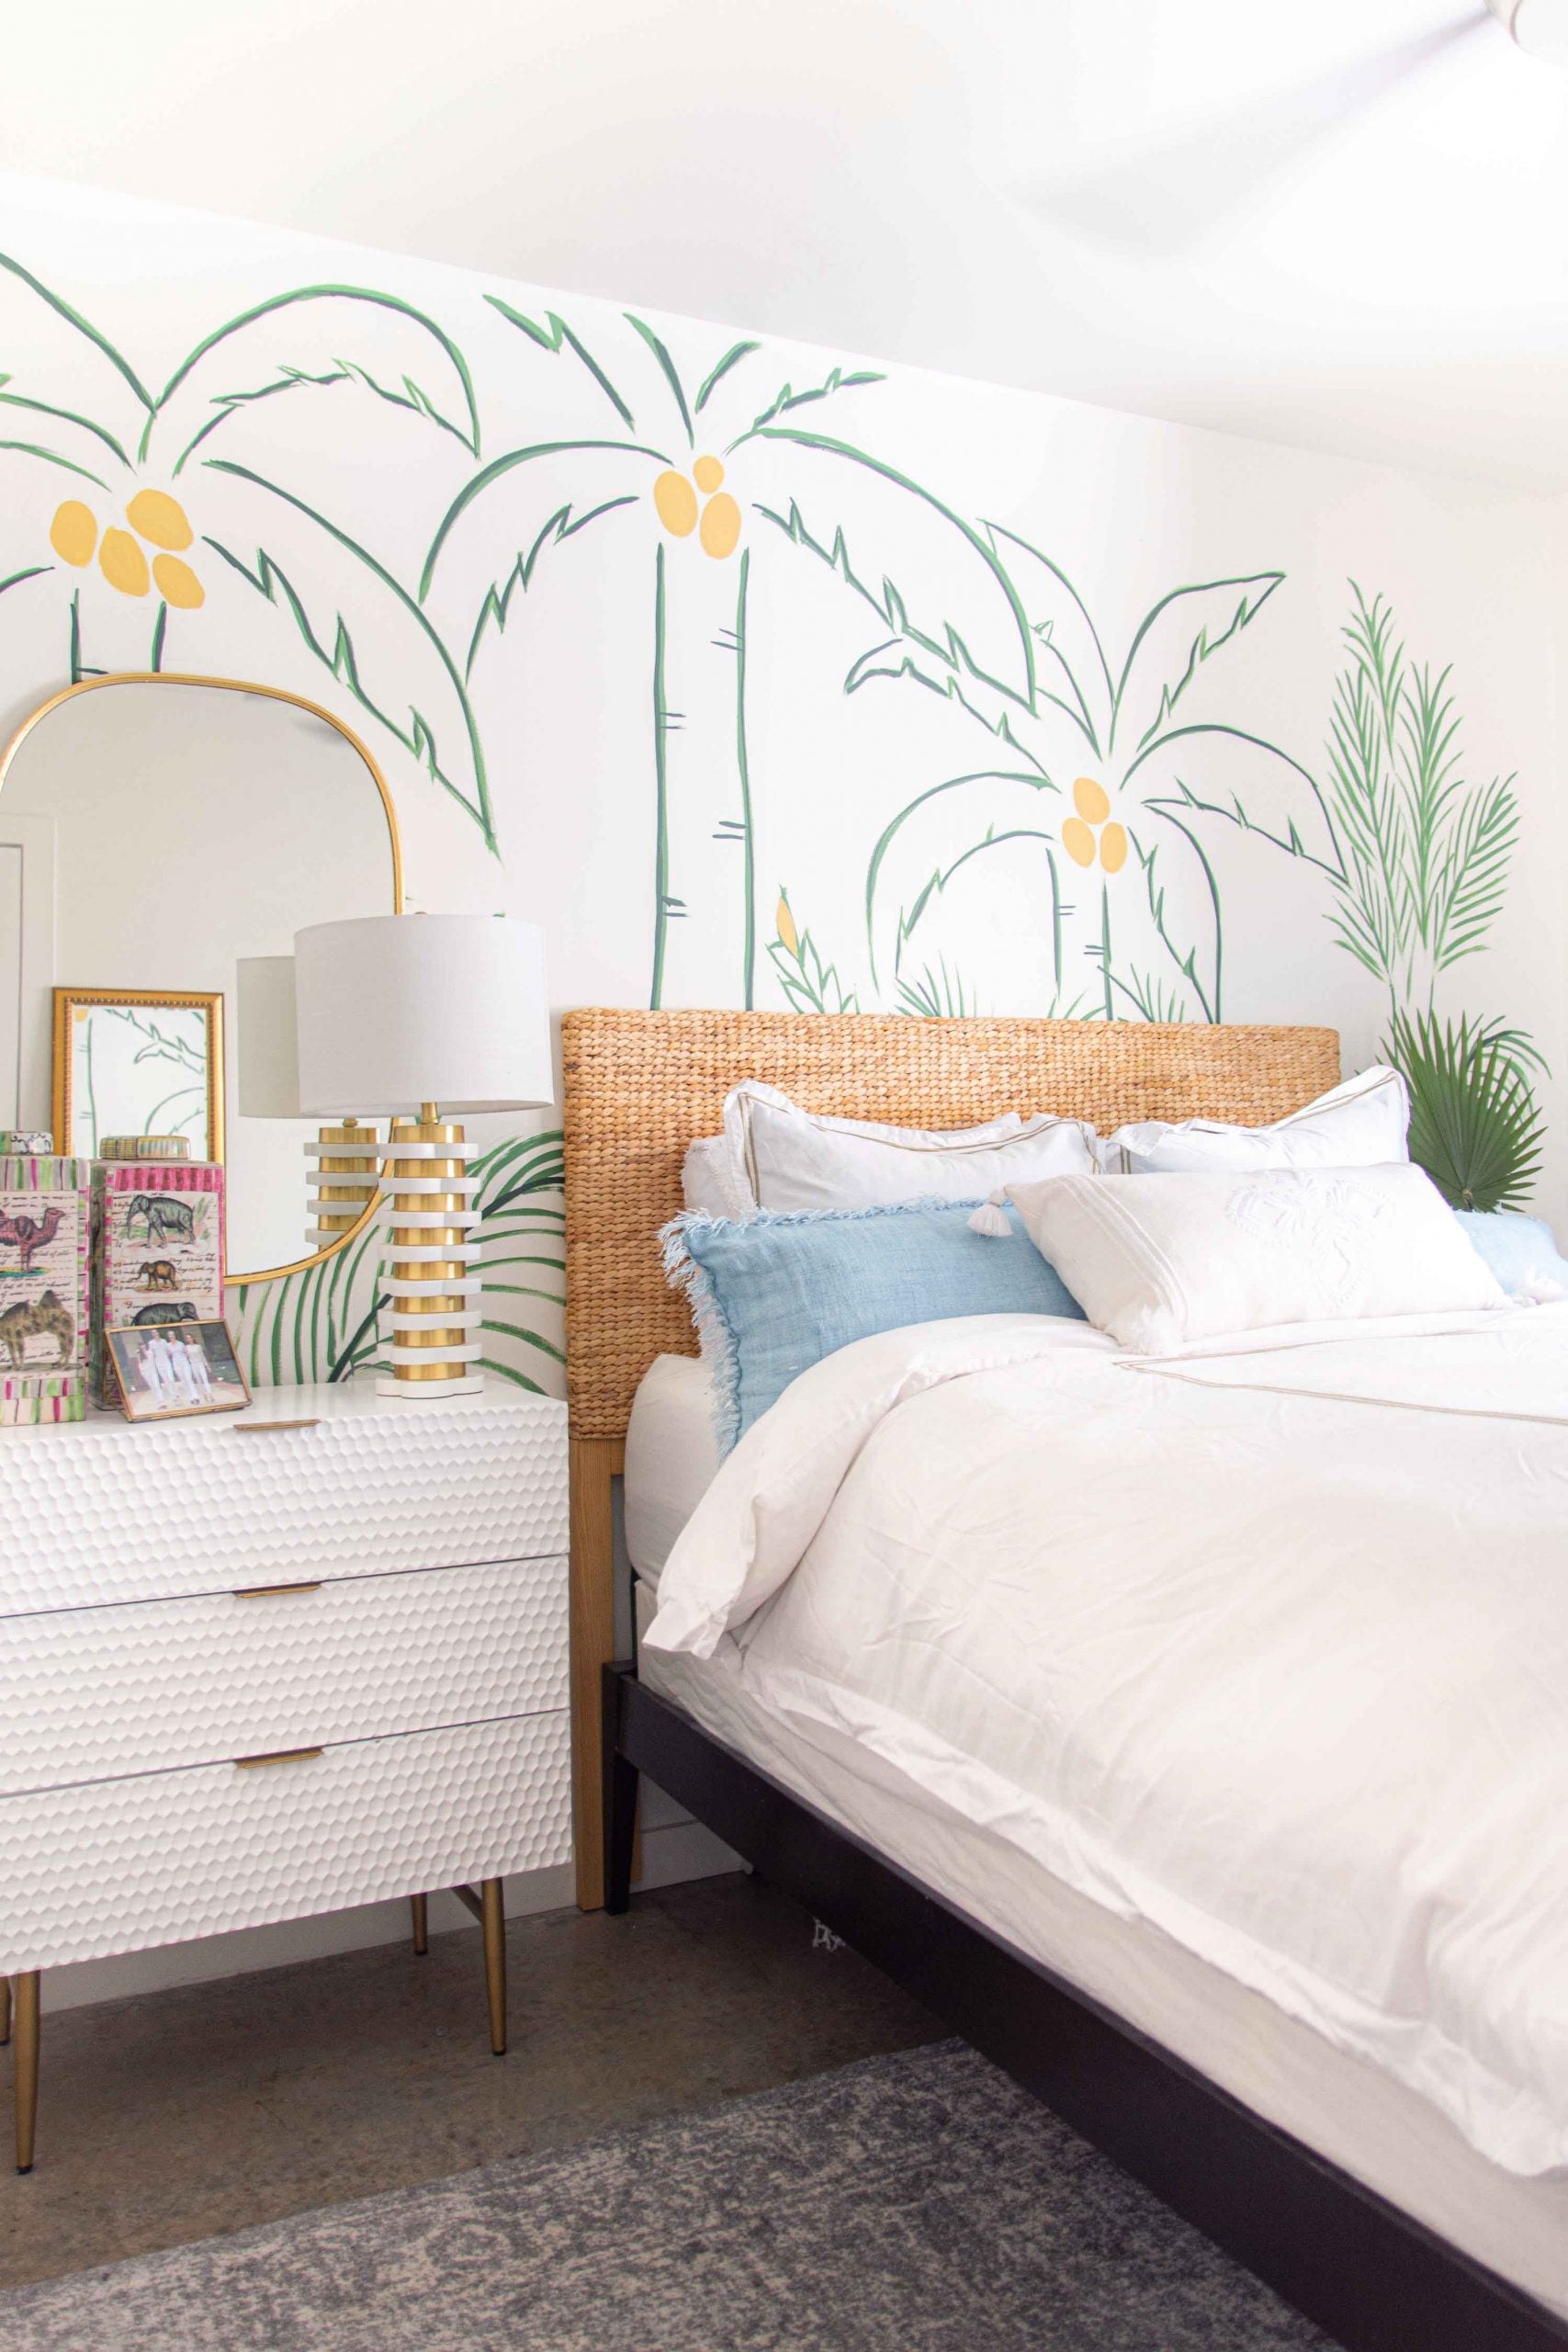 Hand-painted tropical wall mural with palm trees in green and white bedroom design by Kevin O'Gara on Thou Swell #wallmural #paintedmural #bedroomwall #bedroomdecor #bedroomdesign #tropicaldesign #tropicalwall #tropicalmural